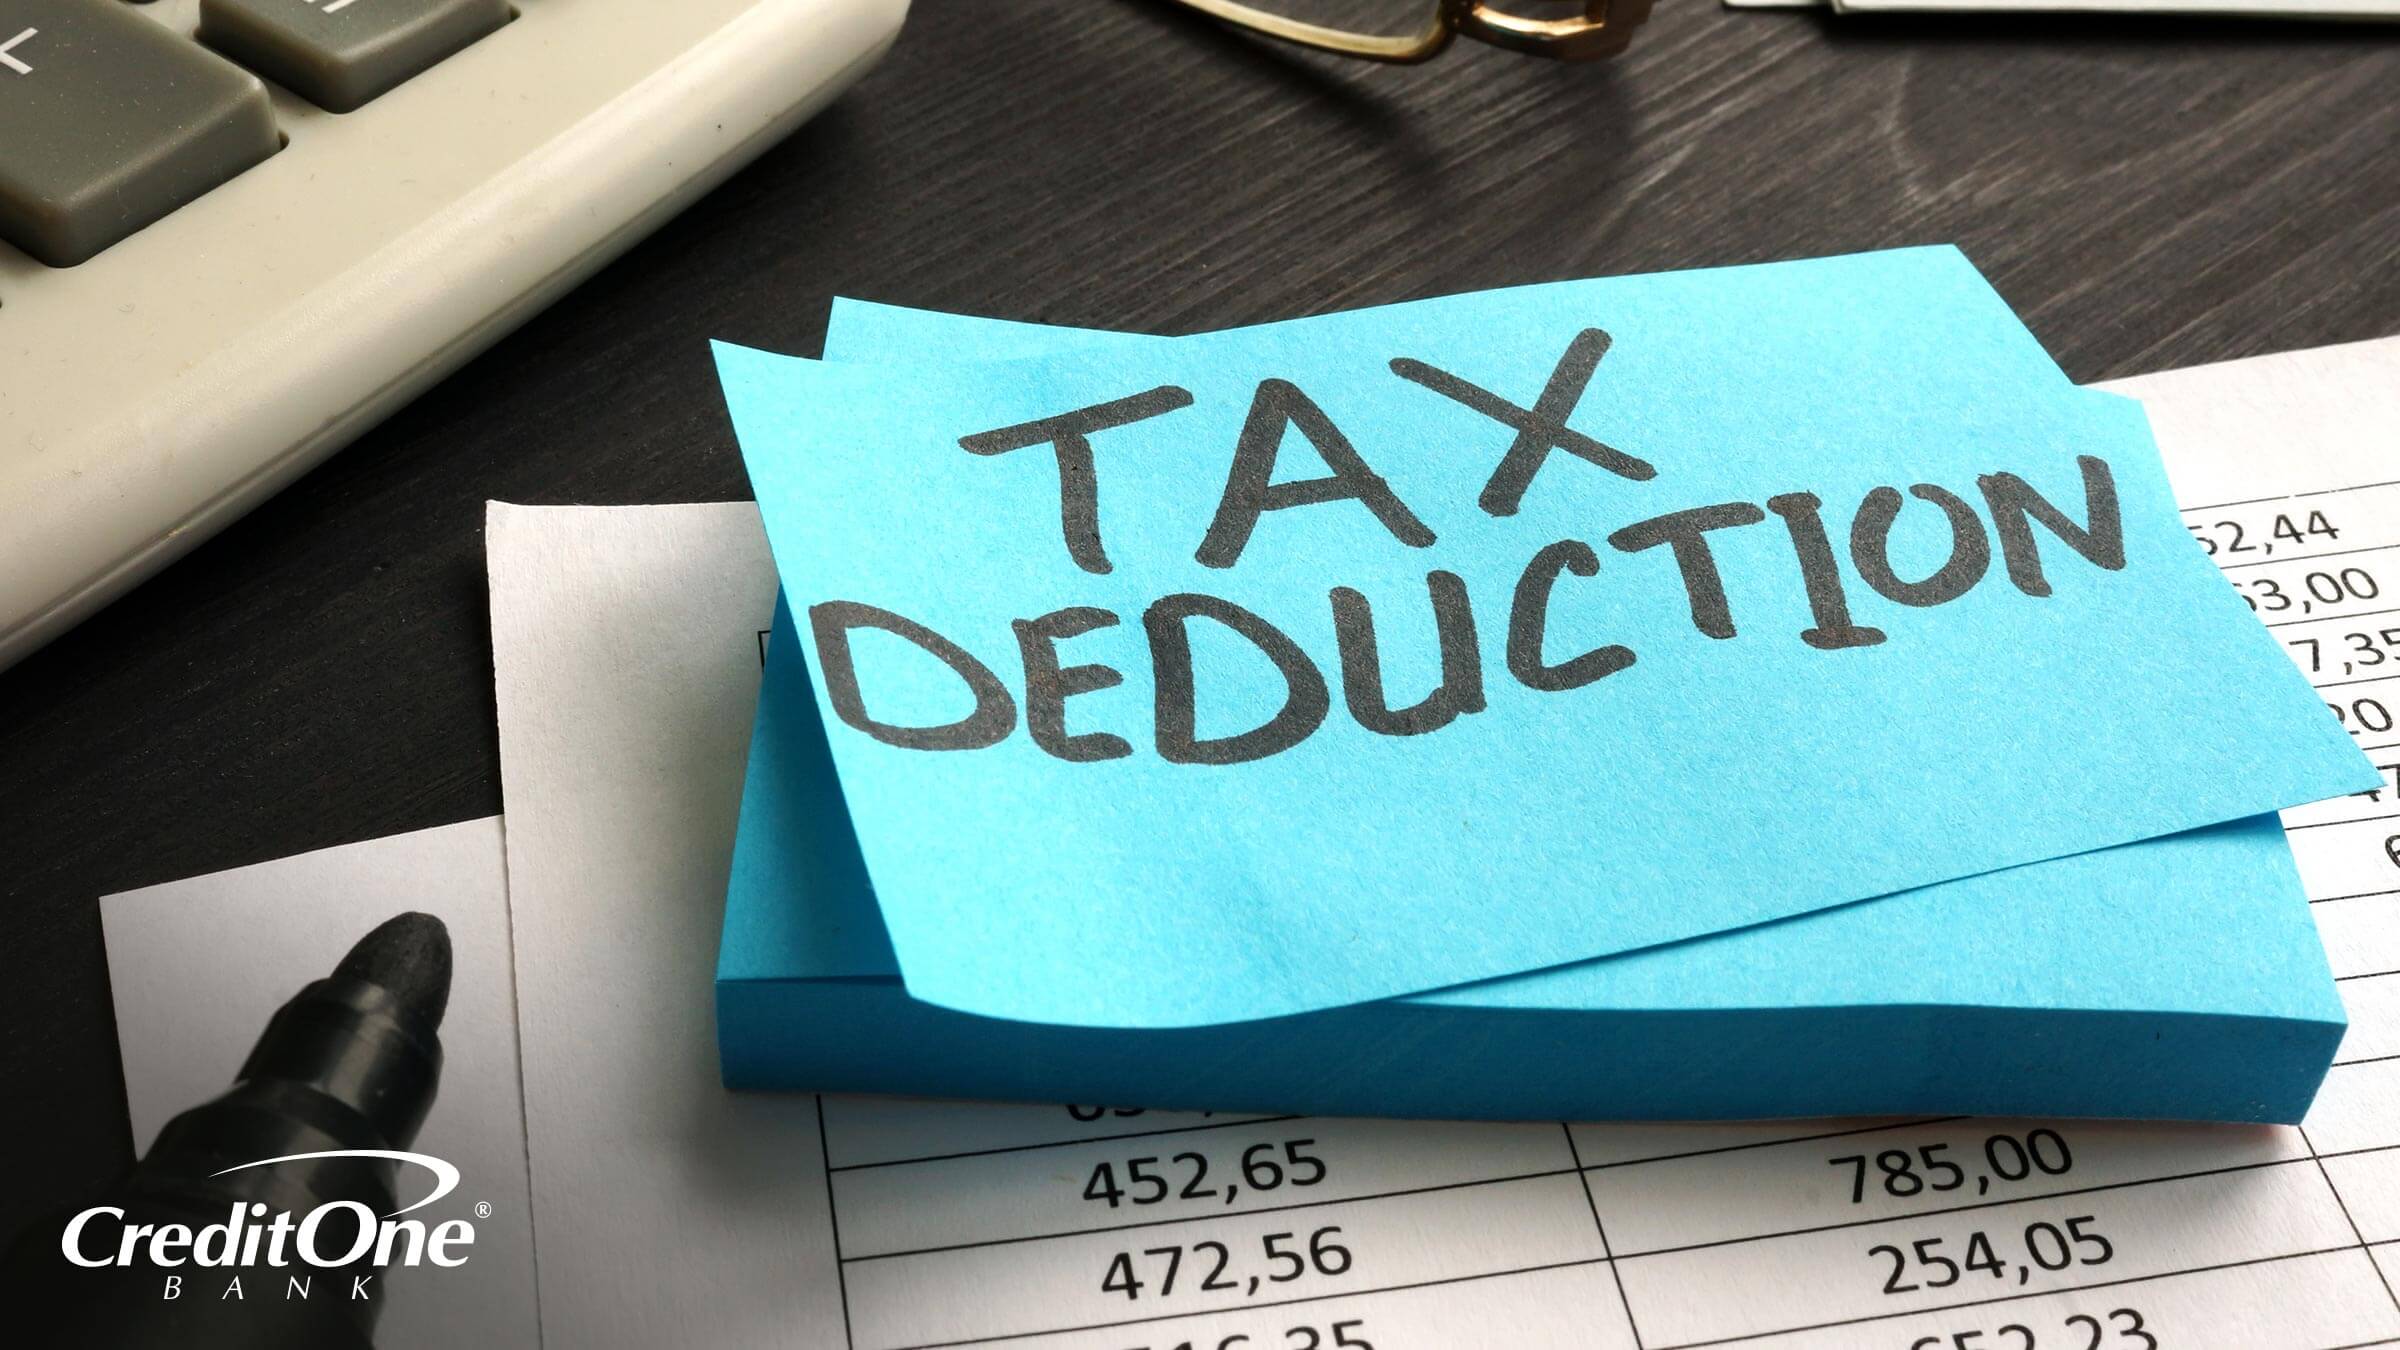 A note on a statement reads “Tax Deduction” to indicate sorting itemized deductions before filing taxes